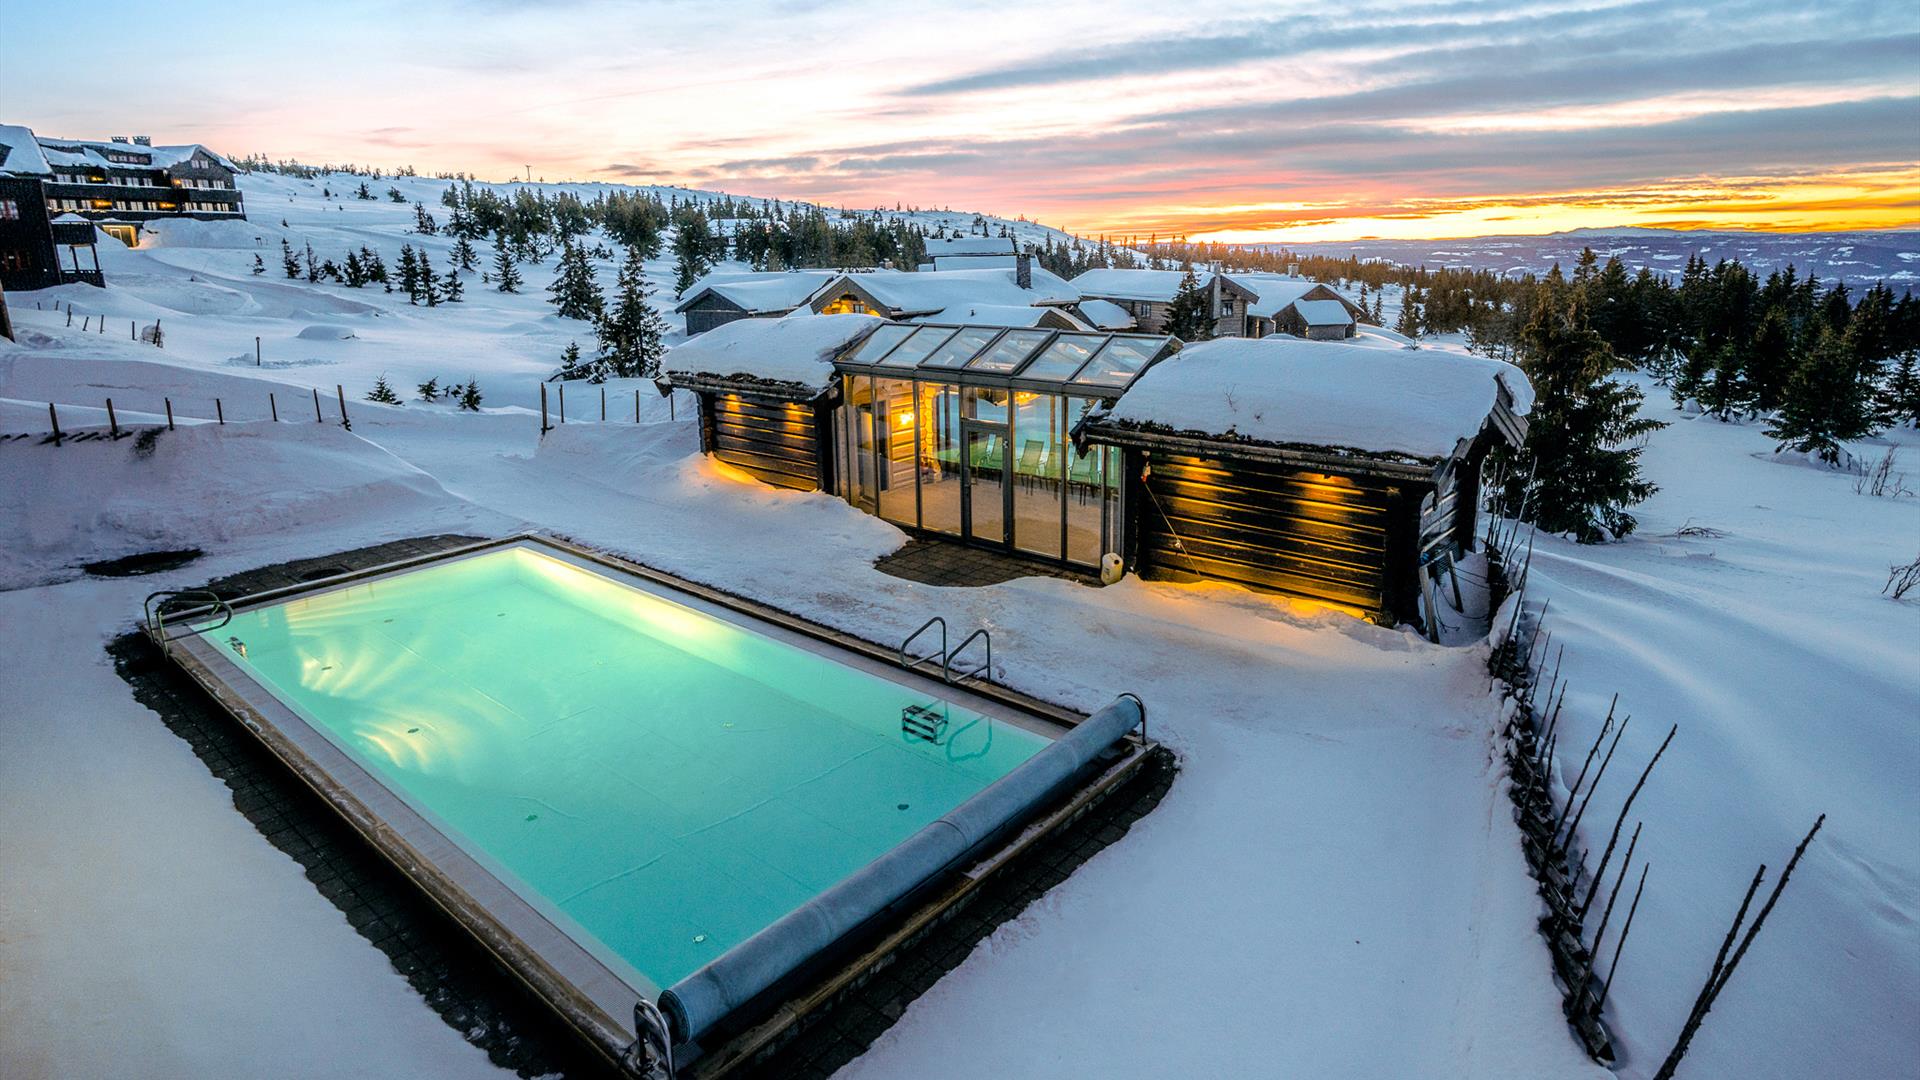 Outdoor swimming pool at Ilsetra, Hafjell.